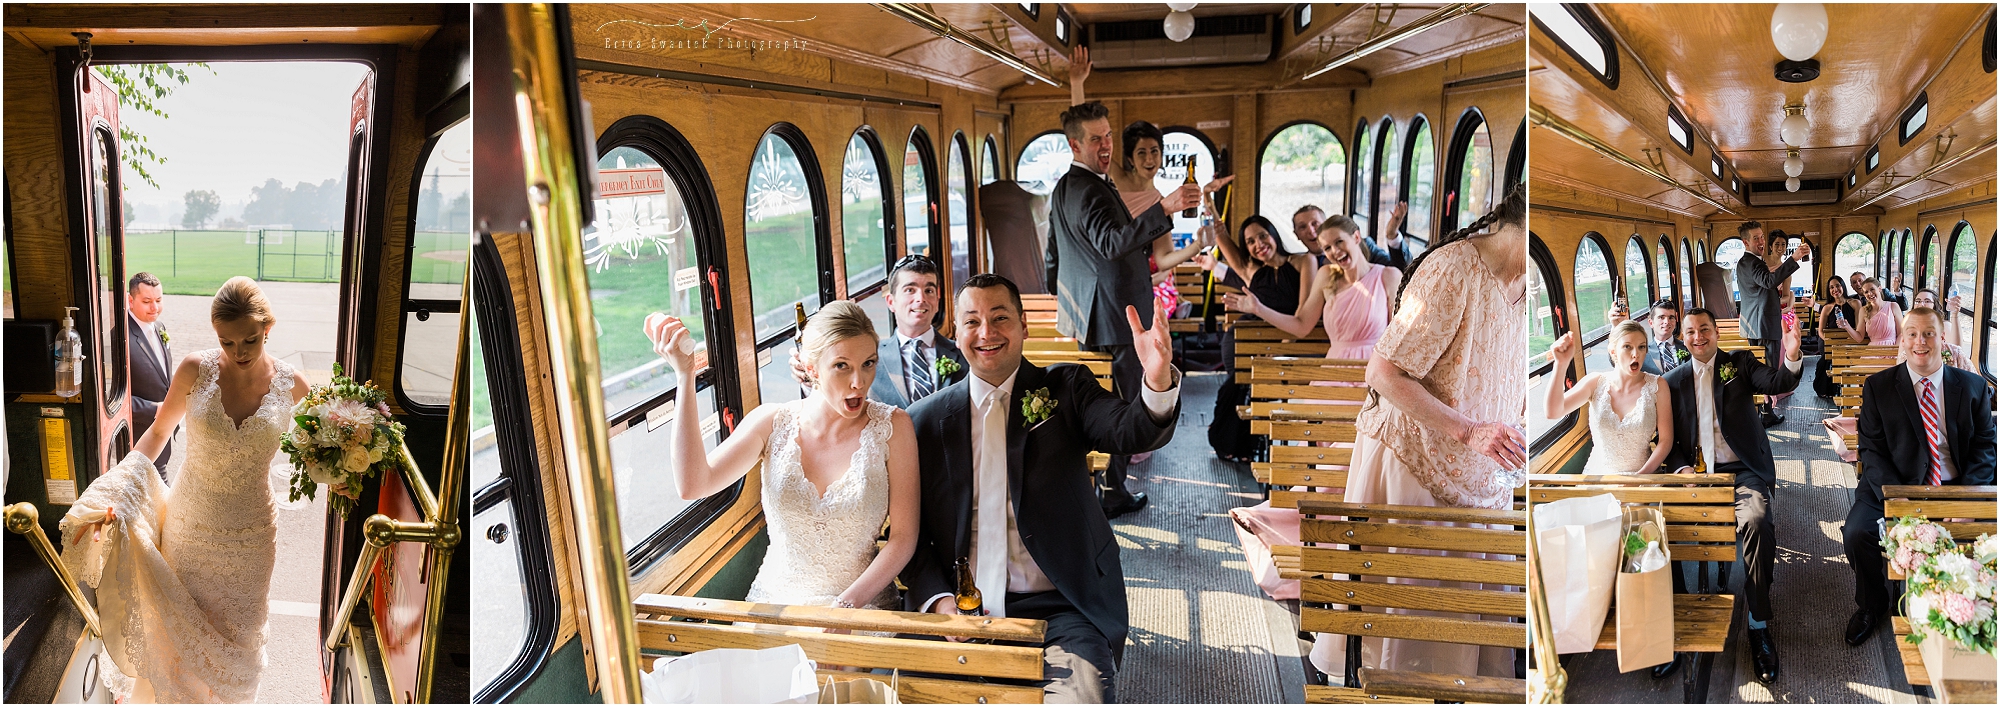 Deschutes Brewery Wedding transportation from the Bend Trolley. 